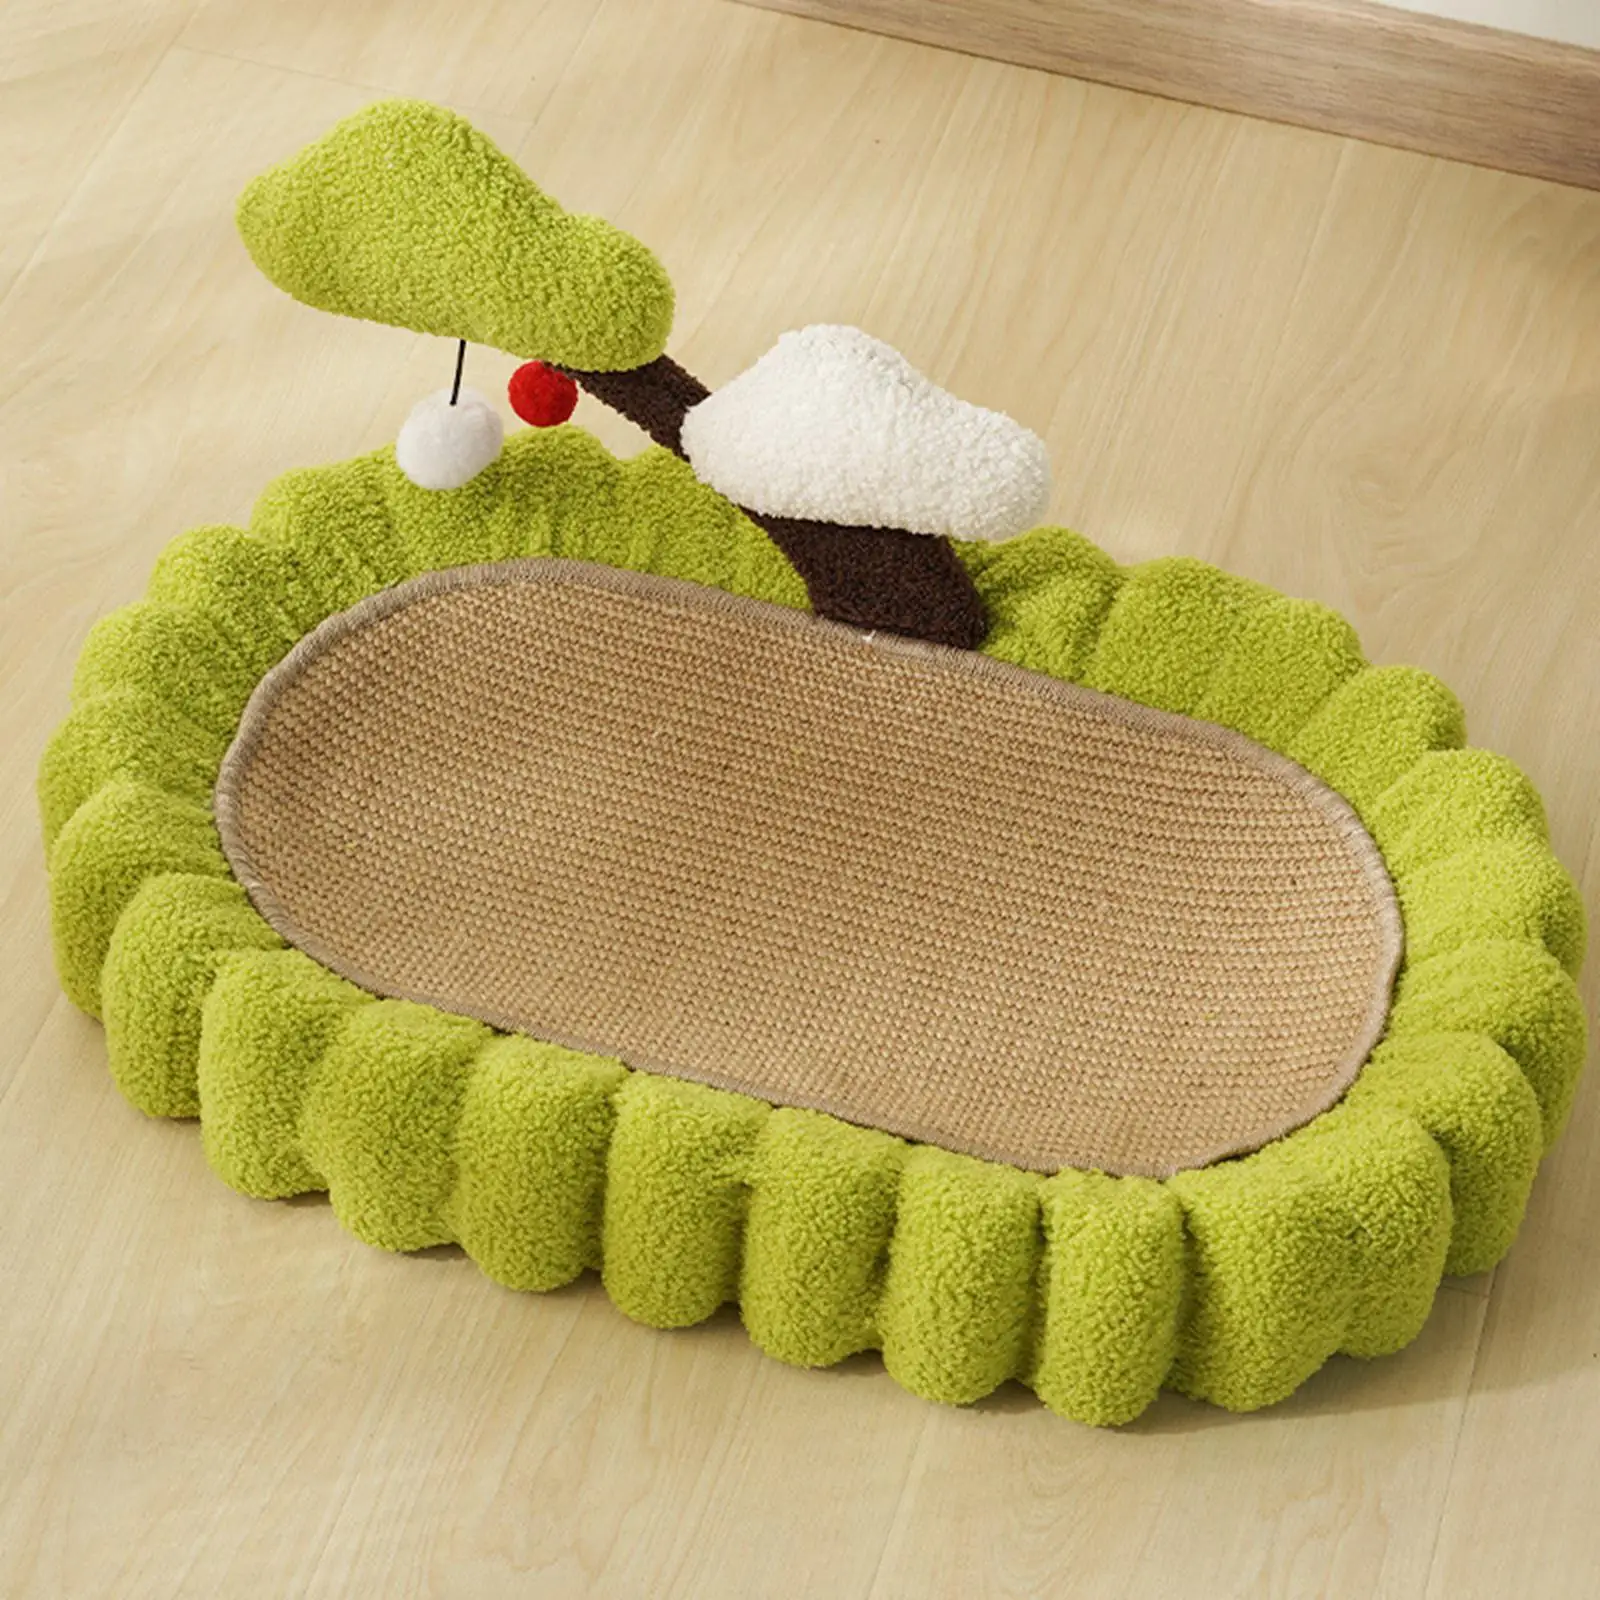 Cat Scratcher Bed Scratcher Pad Scratching Pad for Kitty Playing Indoor Cats